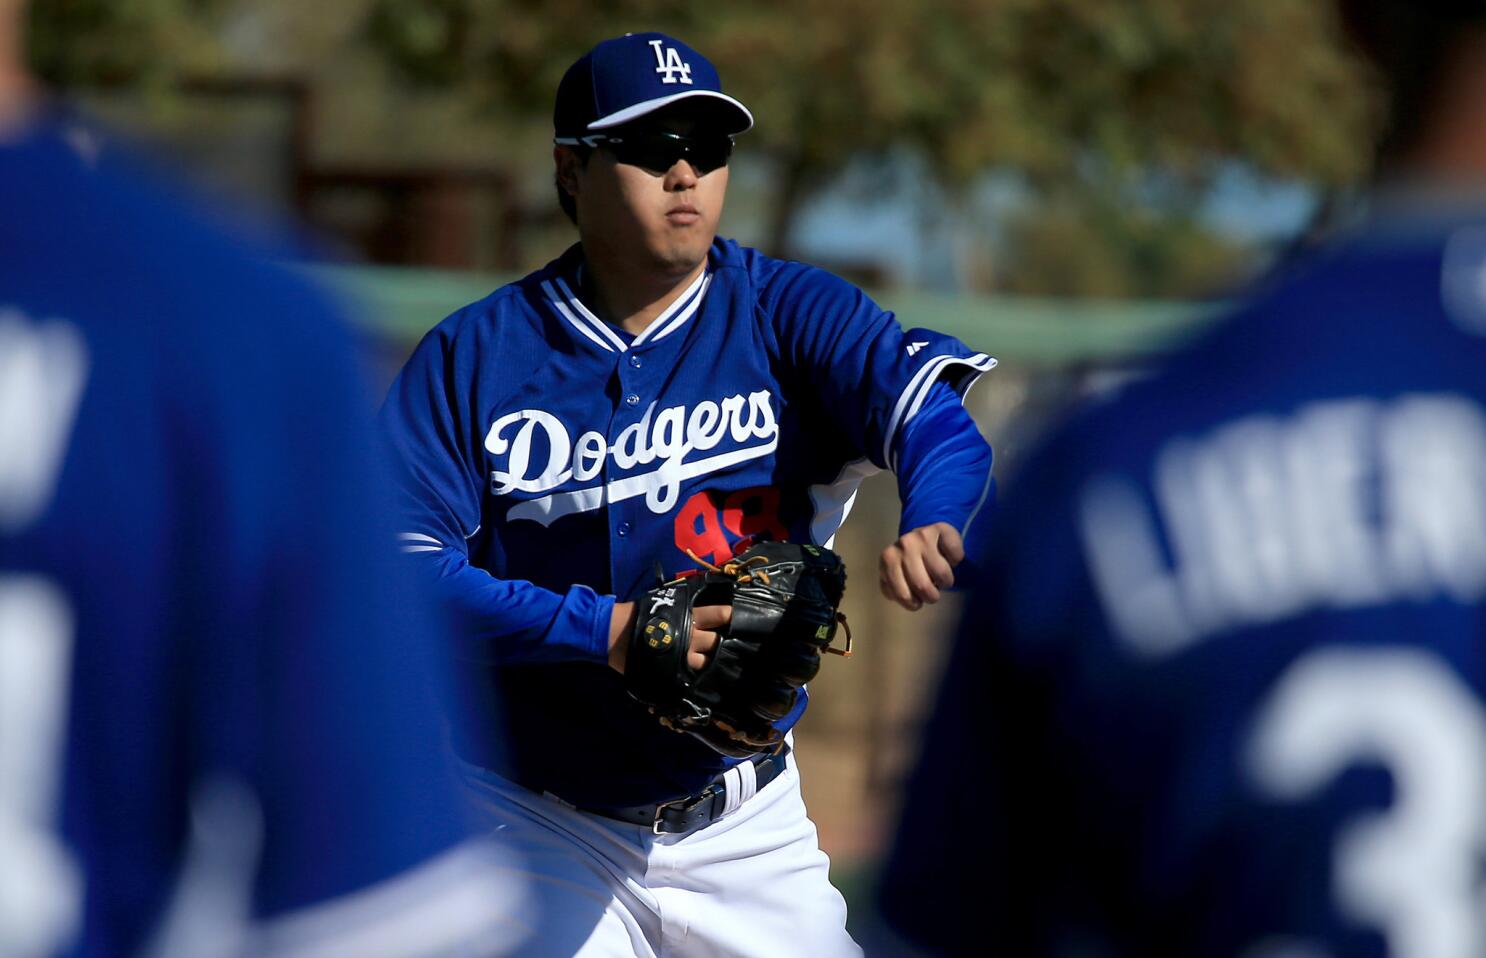 Dodgers' gamble with Ryu Hyun-jin paying off: paper